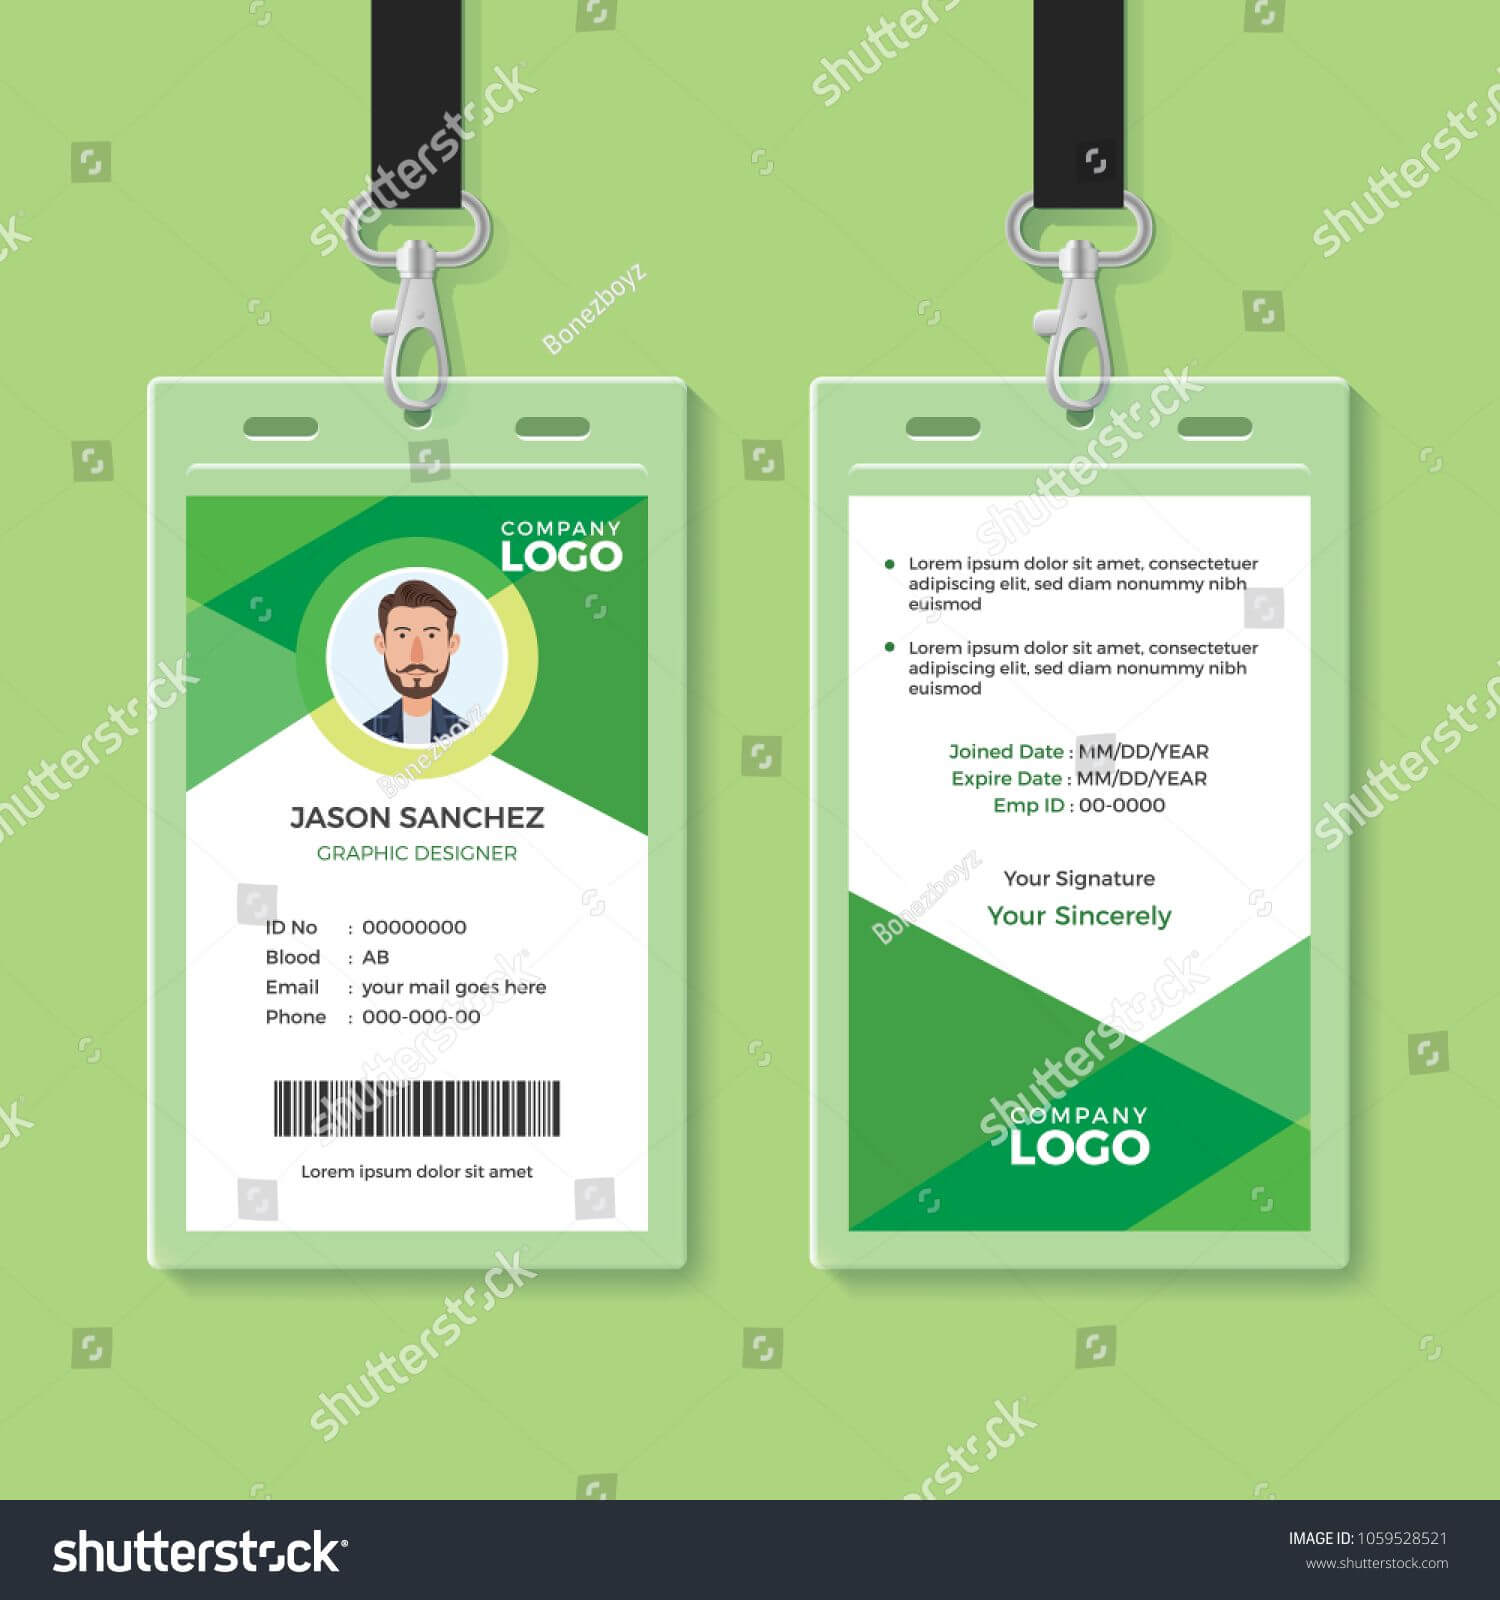 Simple And Clean Green Id Card Design Template Green#clean Throughout Company Id Card Design Template